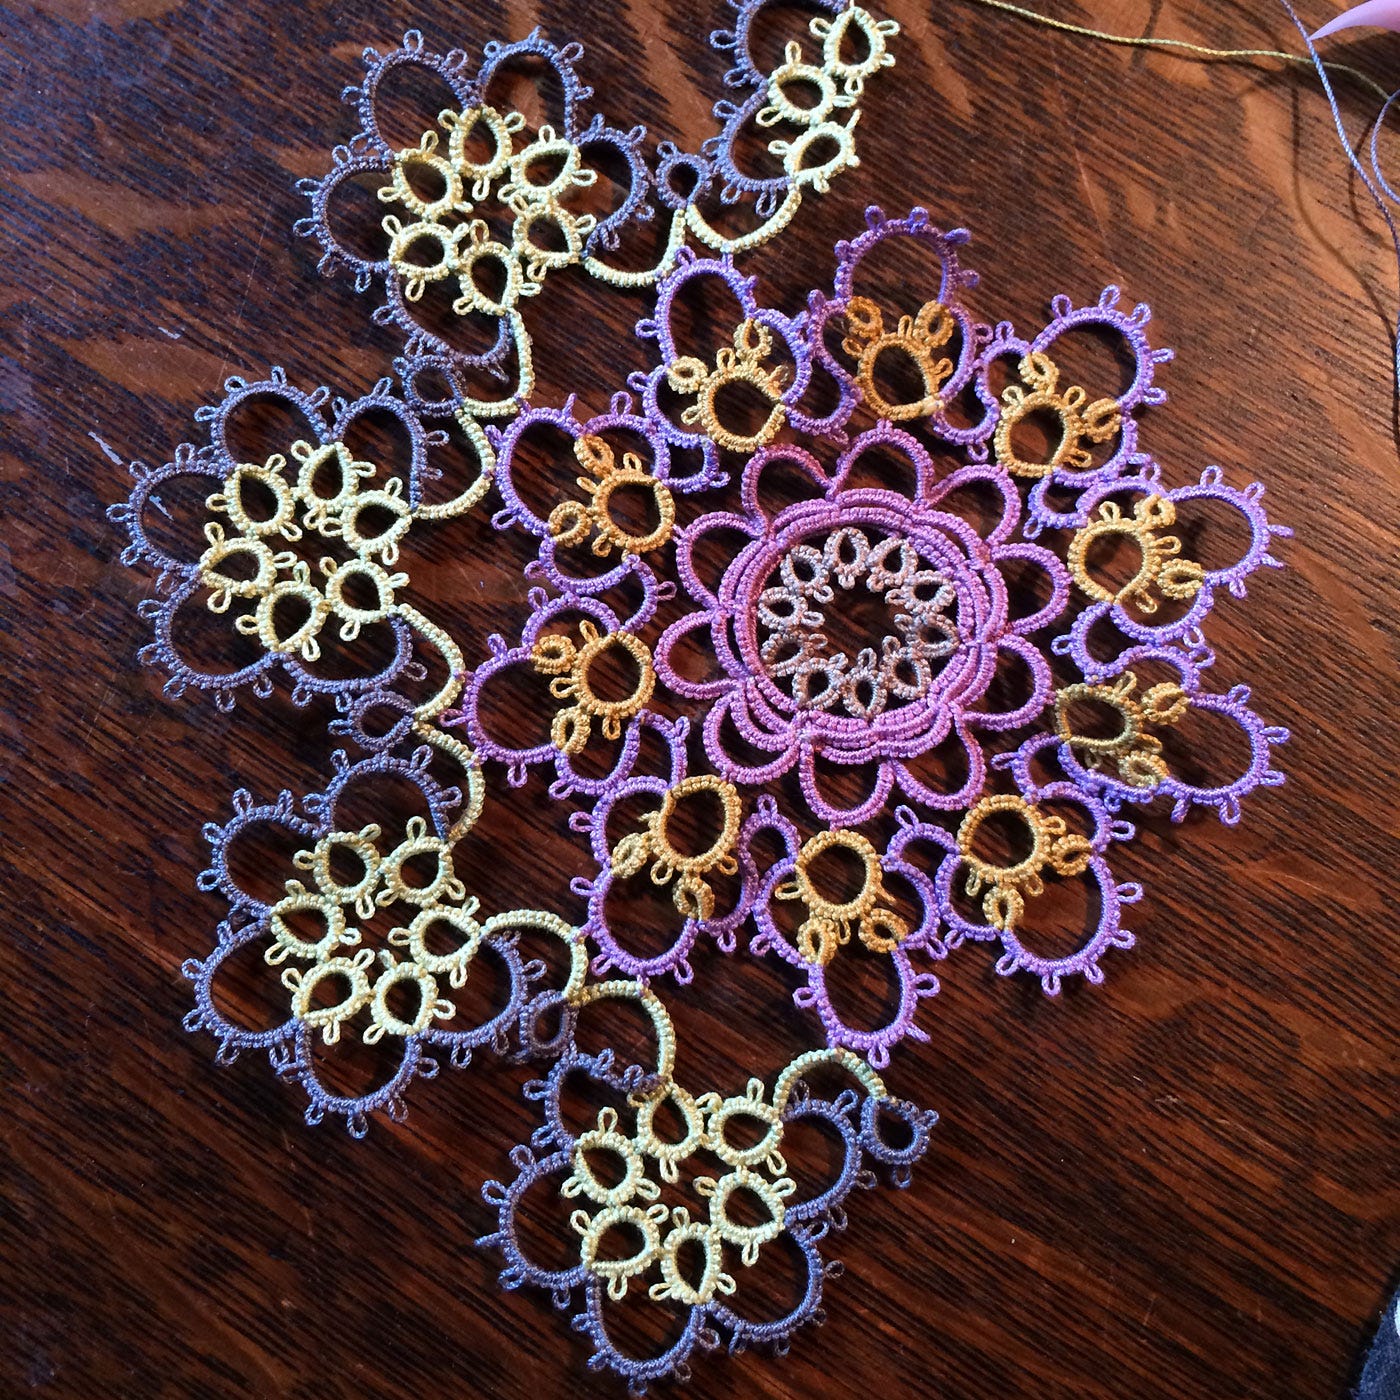 Winners of the 2014 Show 'n Tell Contest : The Tatting Corner